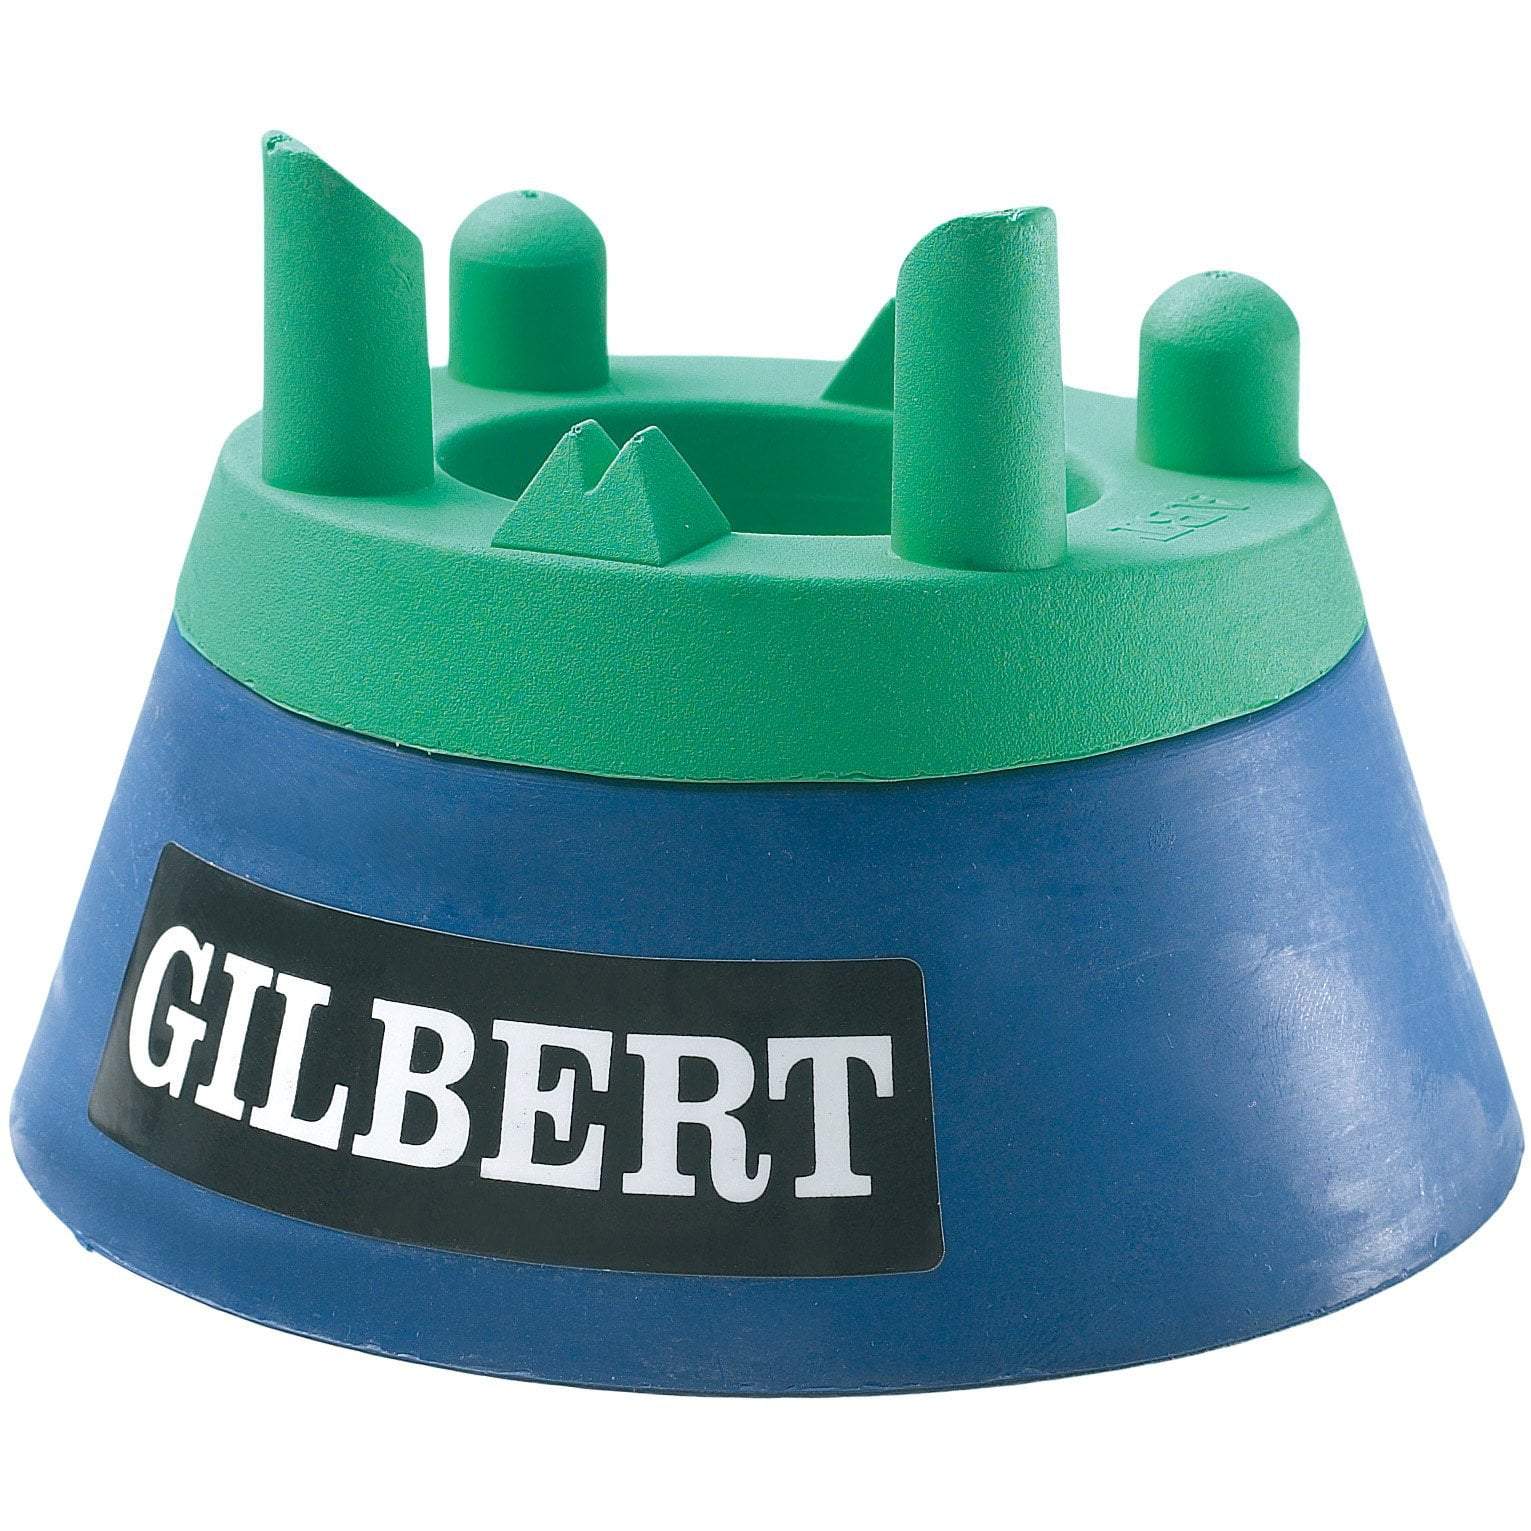 Rugby Imports Gilbert Adjustable Rugby Kicking Tee